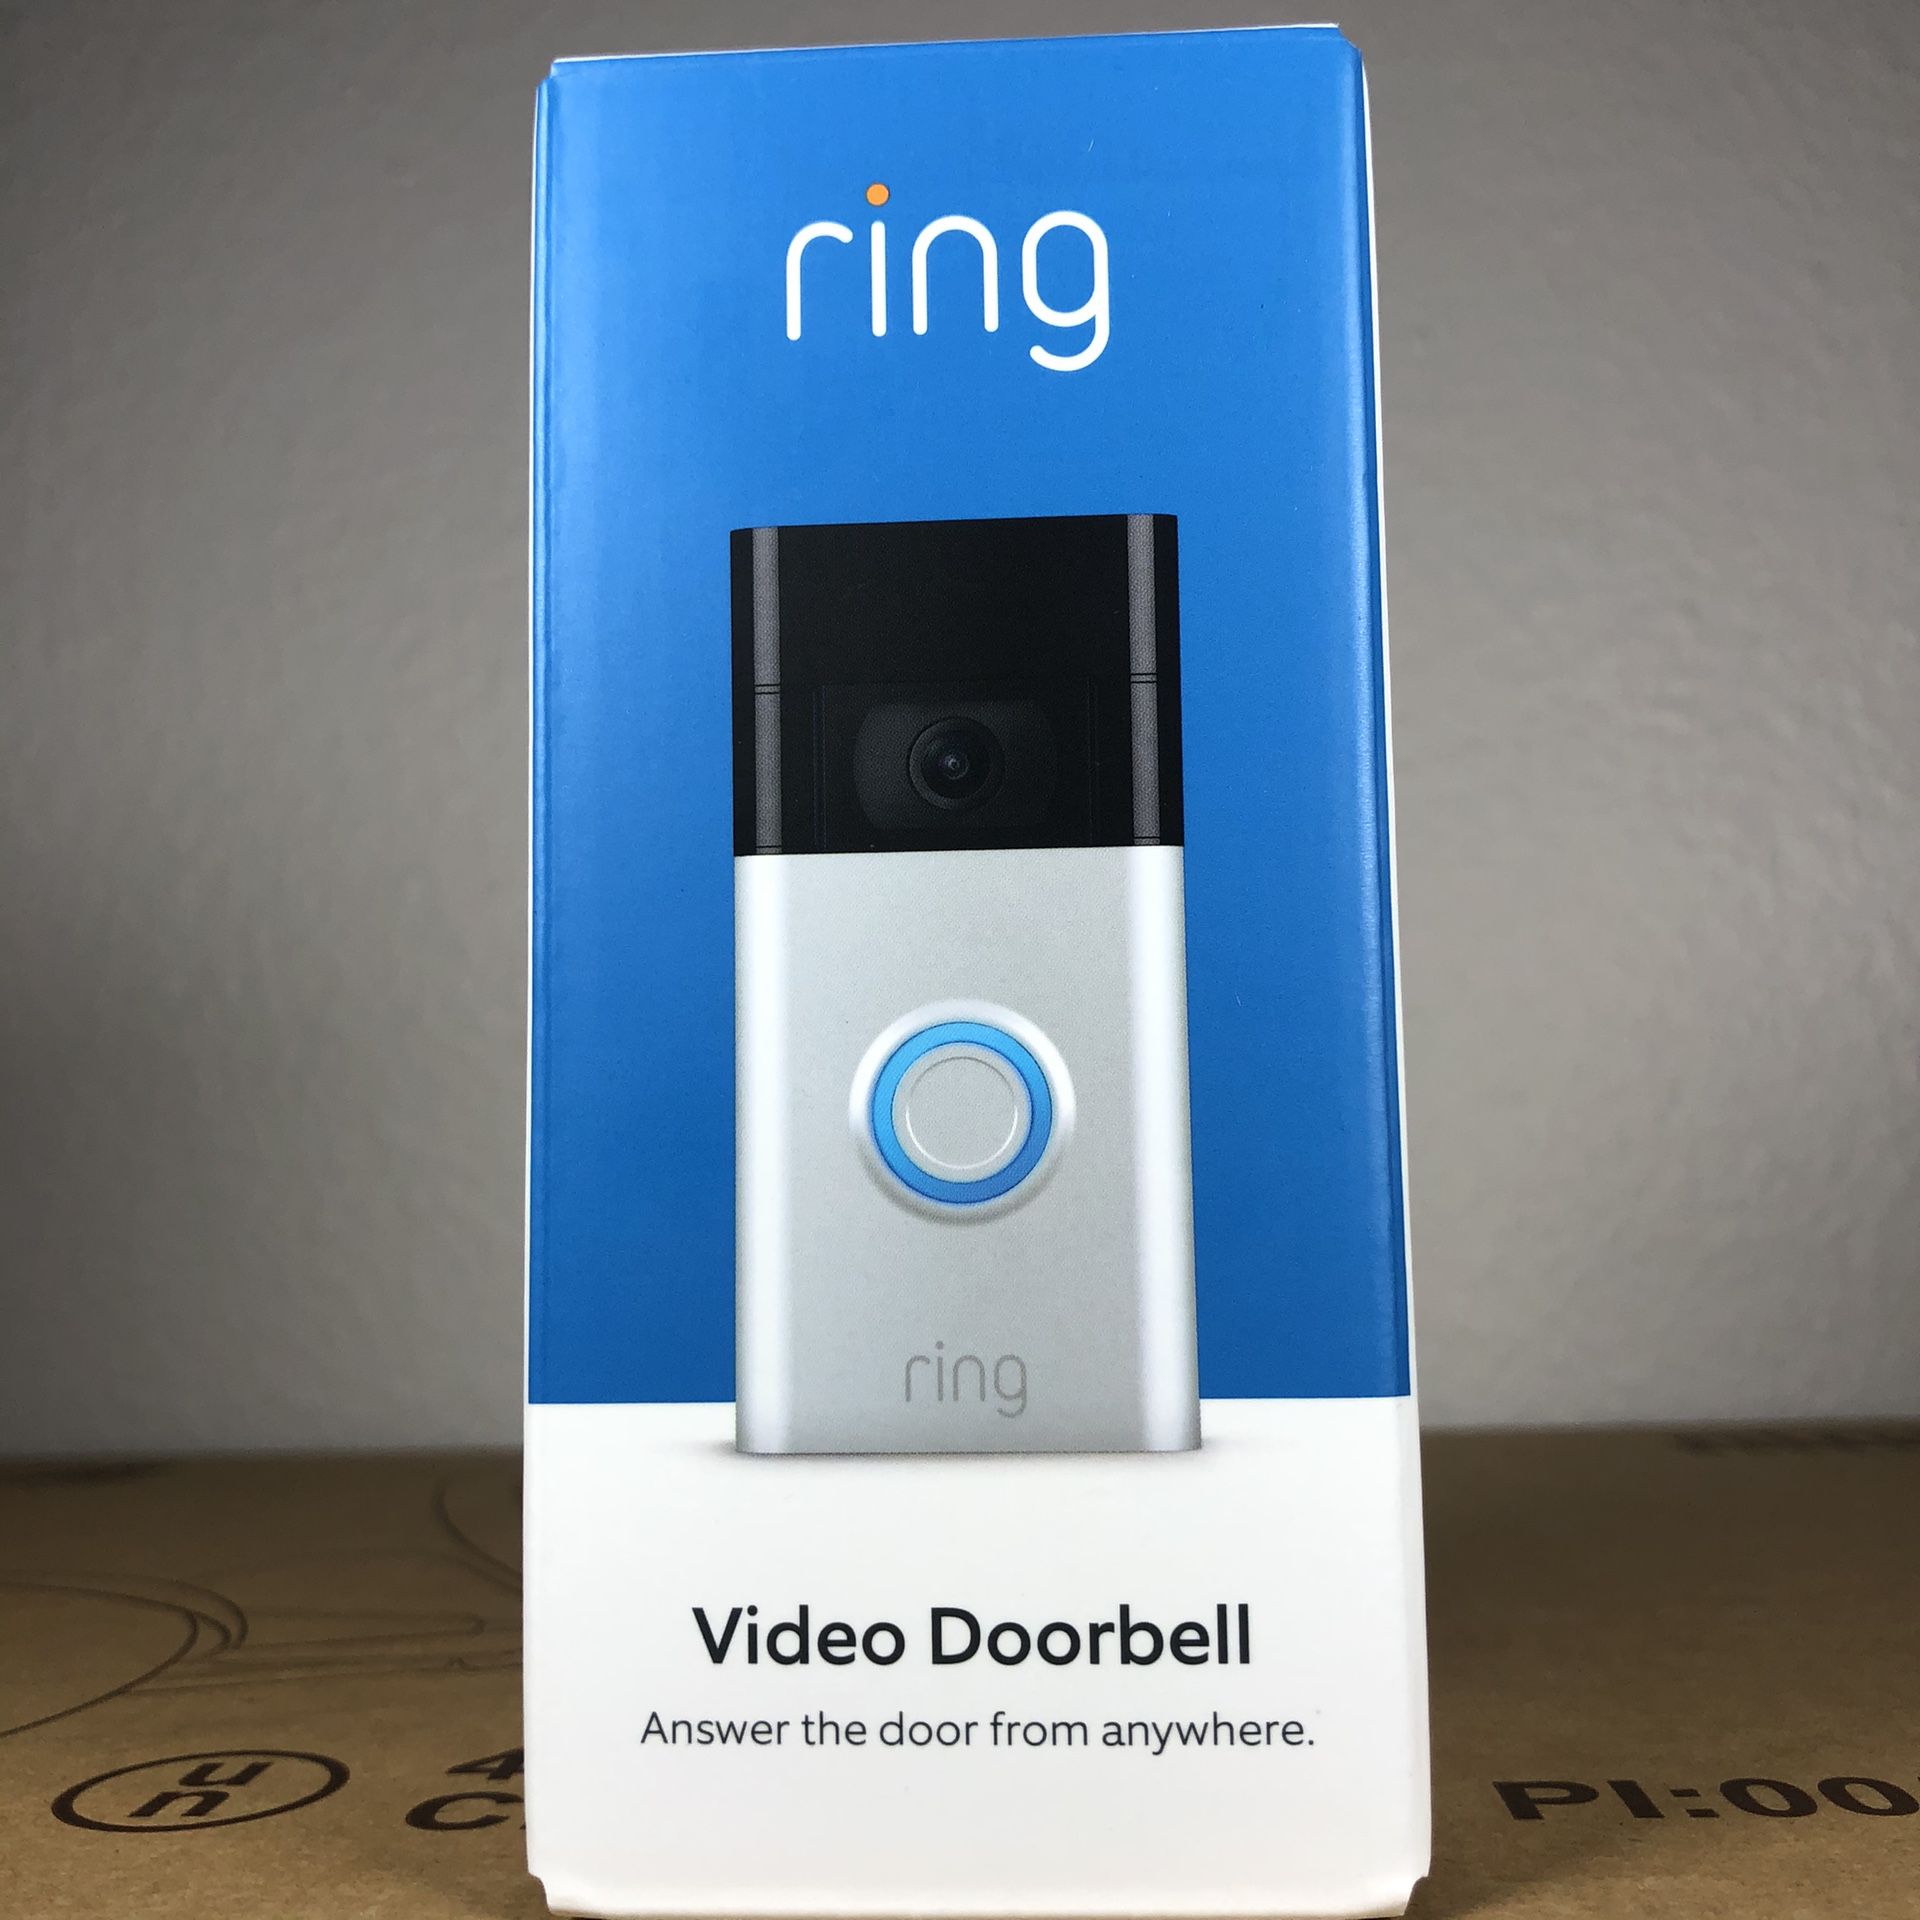 Ring Video Doorbell – 1080p HD video, improved motion detection, easy installation – Satin Nickel (2020 release)